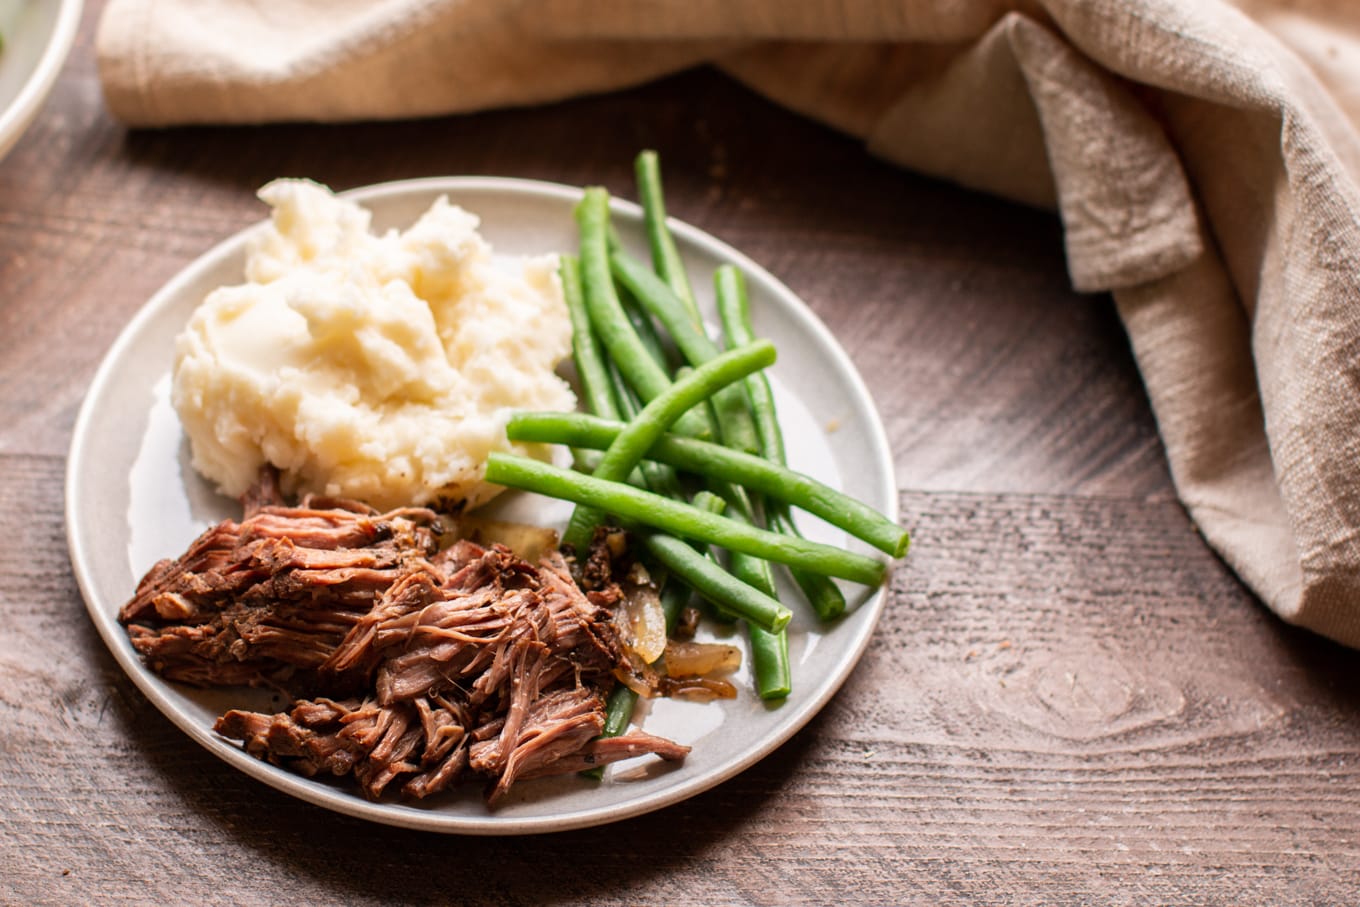 shredded beef on gray plate with green beans and mashed potatoes.